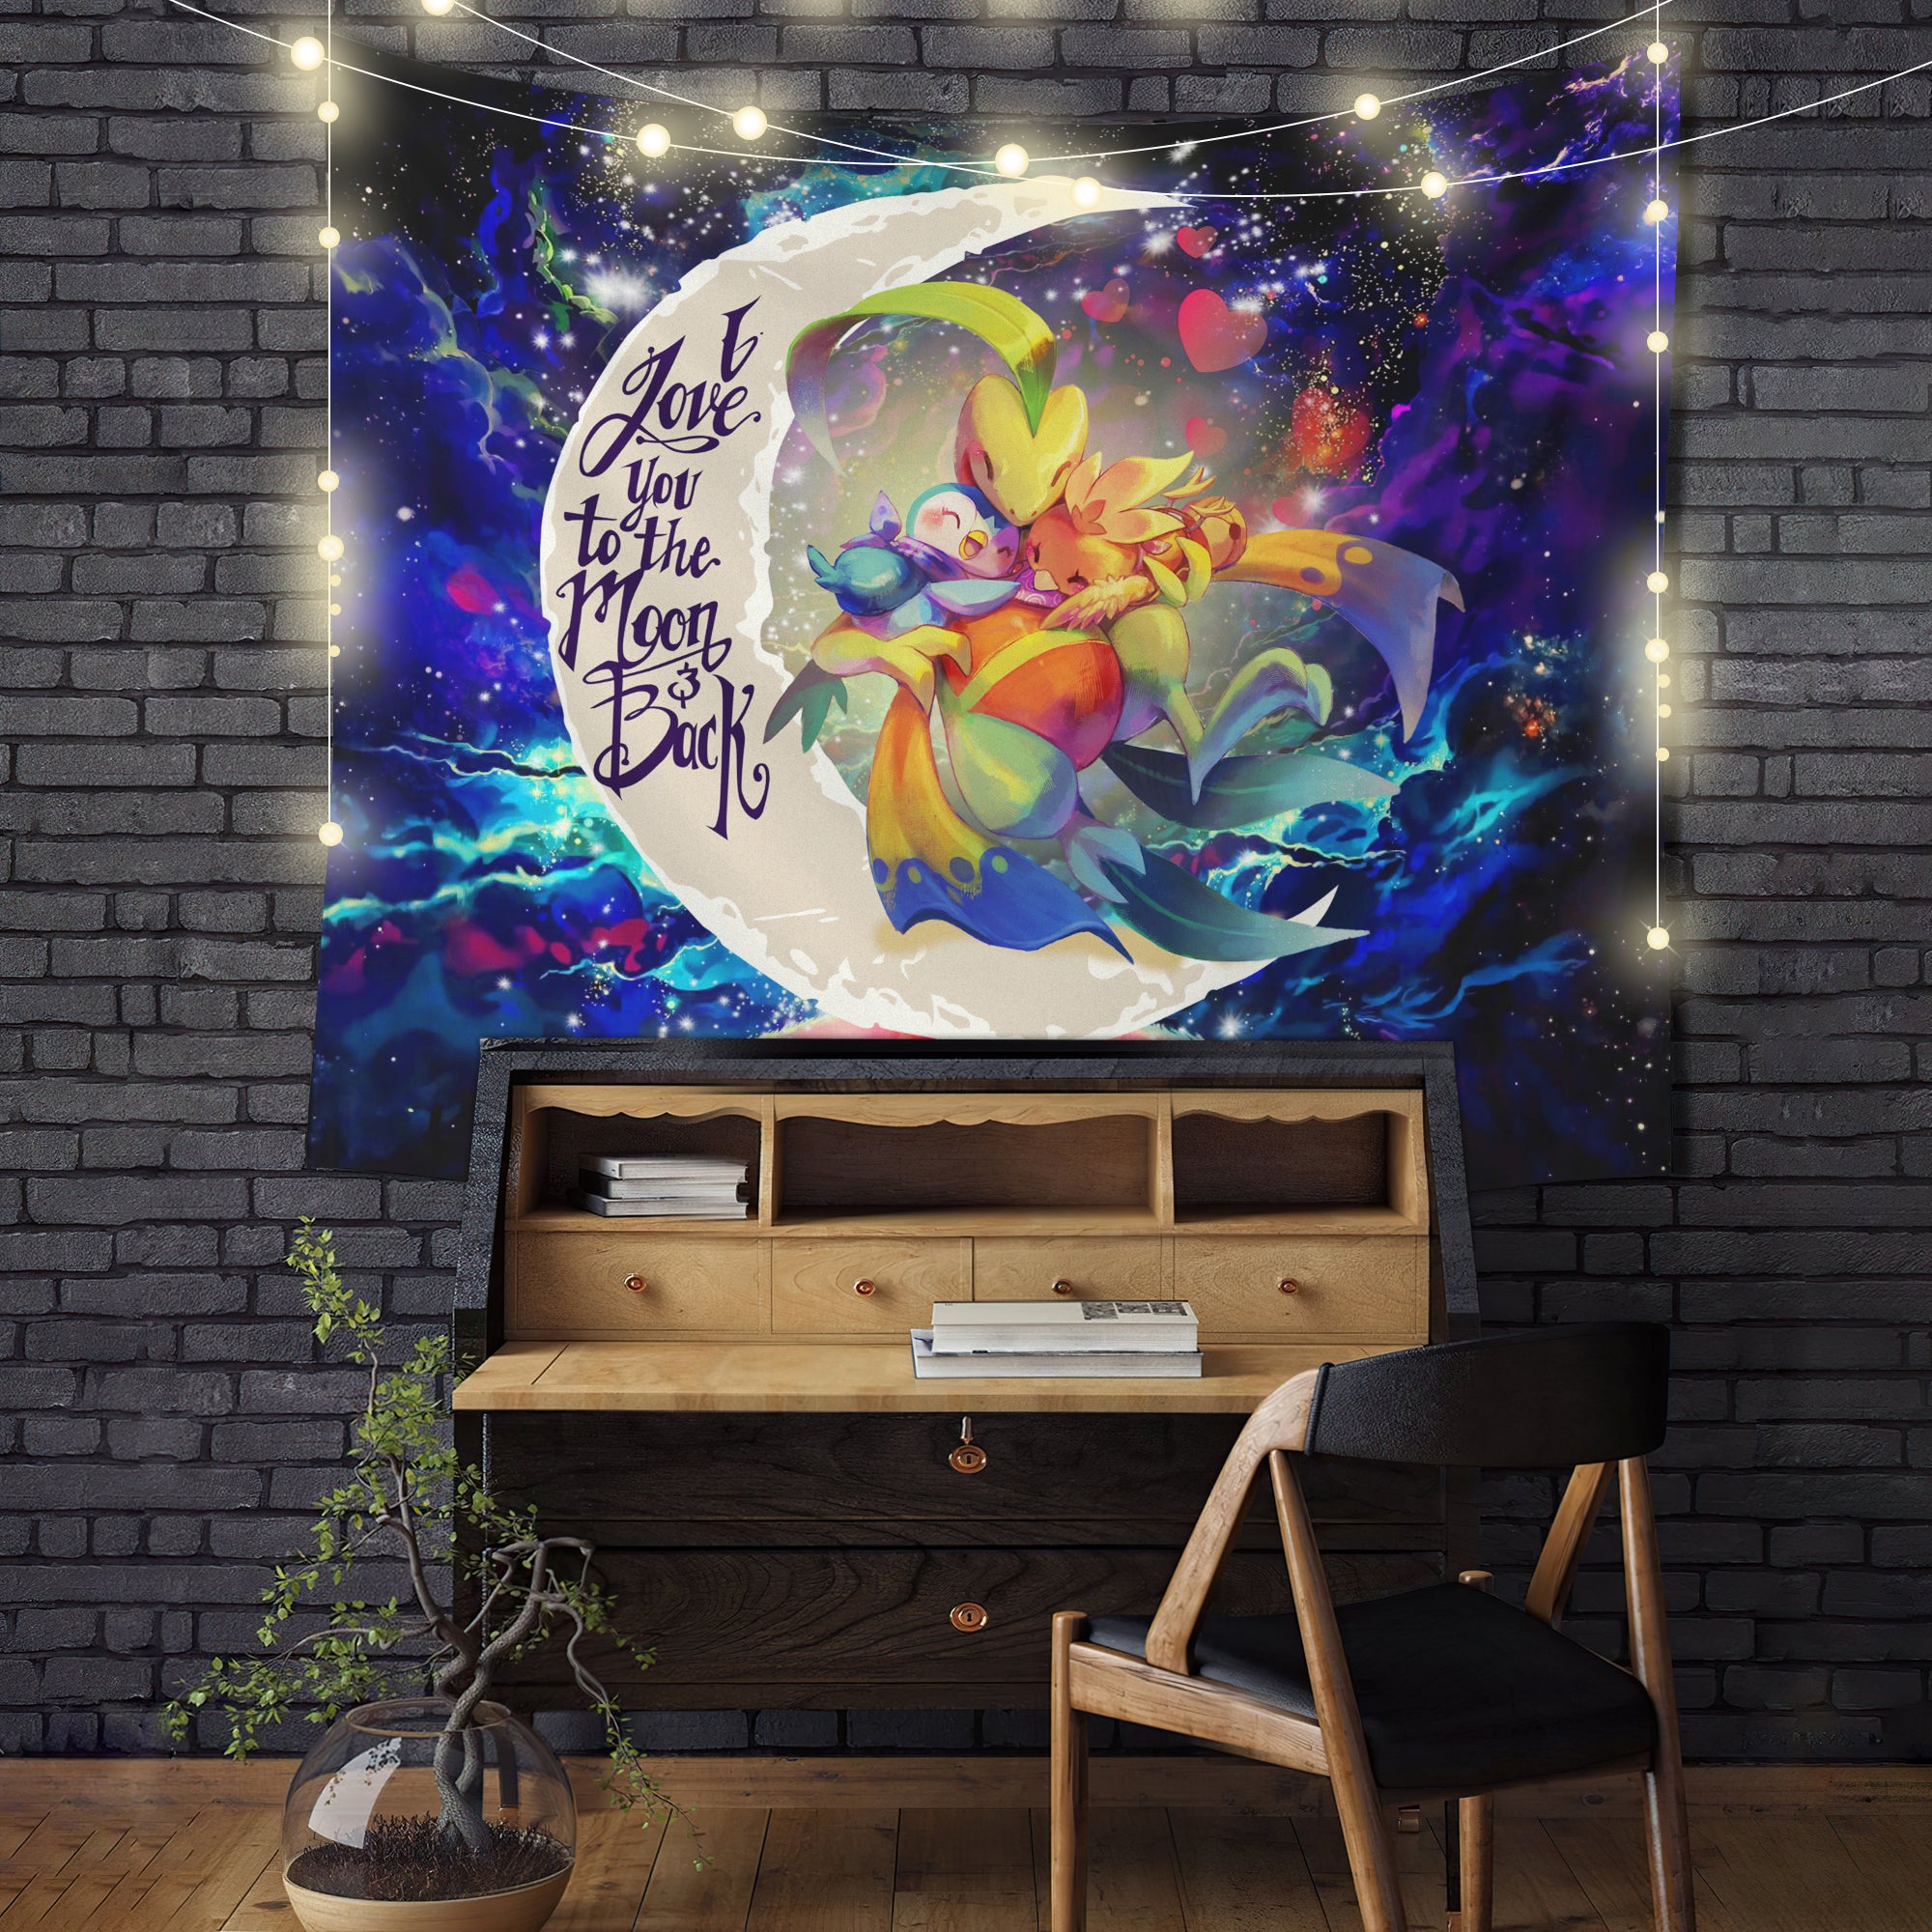 Torchic Grovyle Piplup Pokemon Love You To The Moon Galaxy Tapestry Room Decor Nearkii